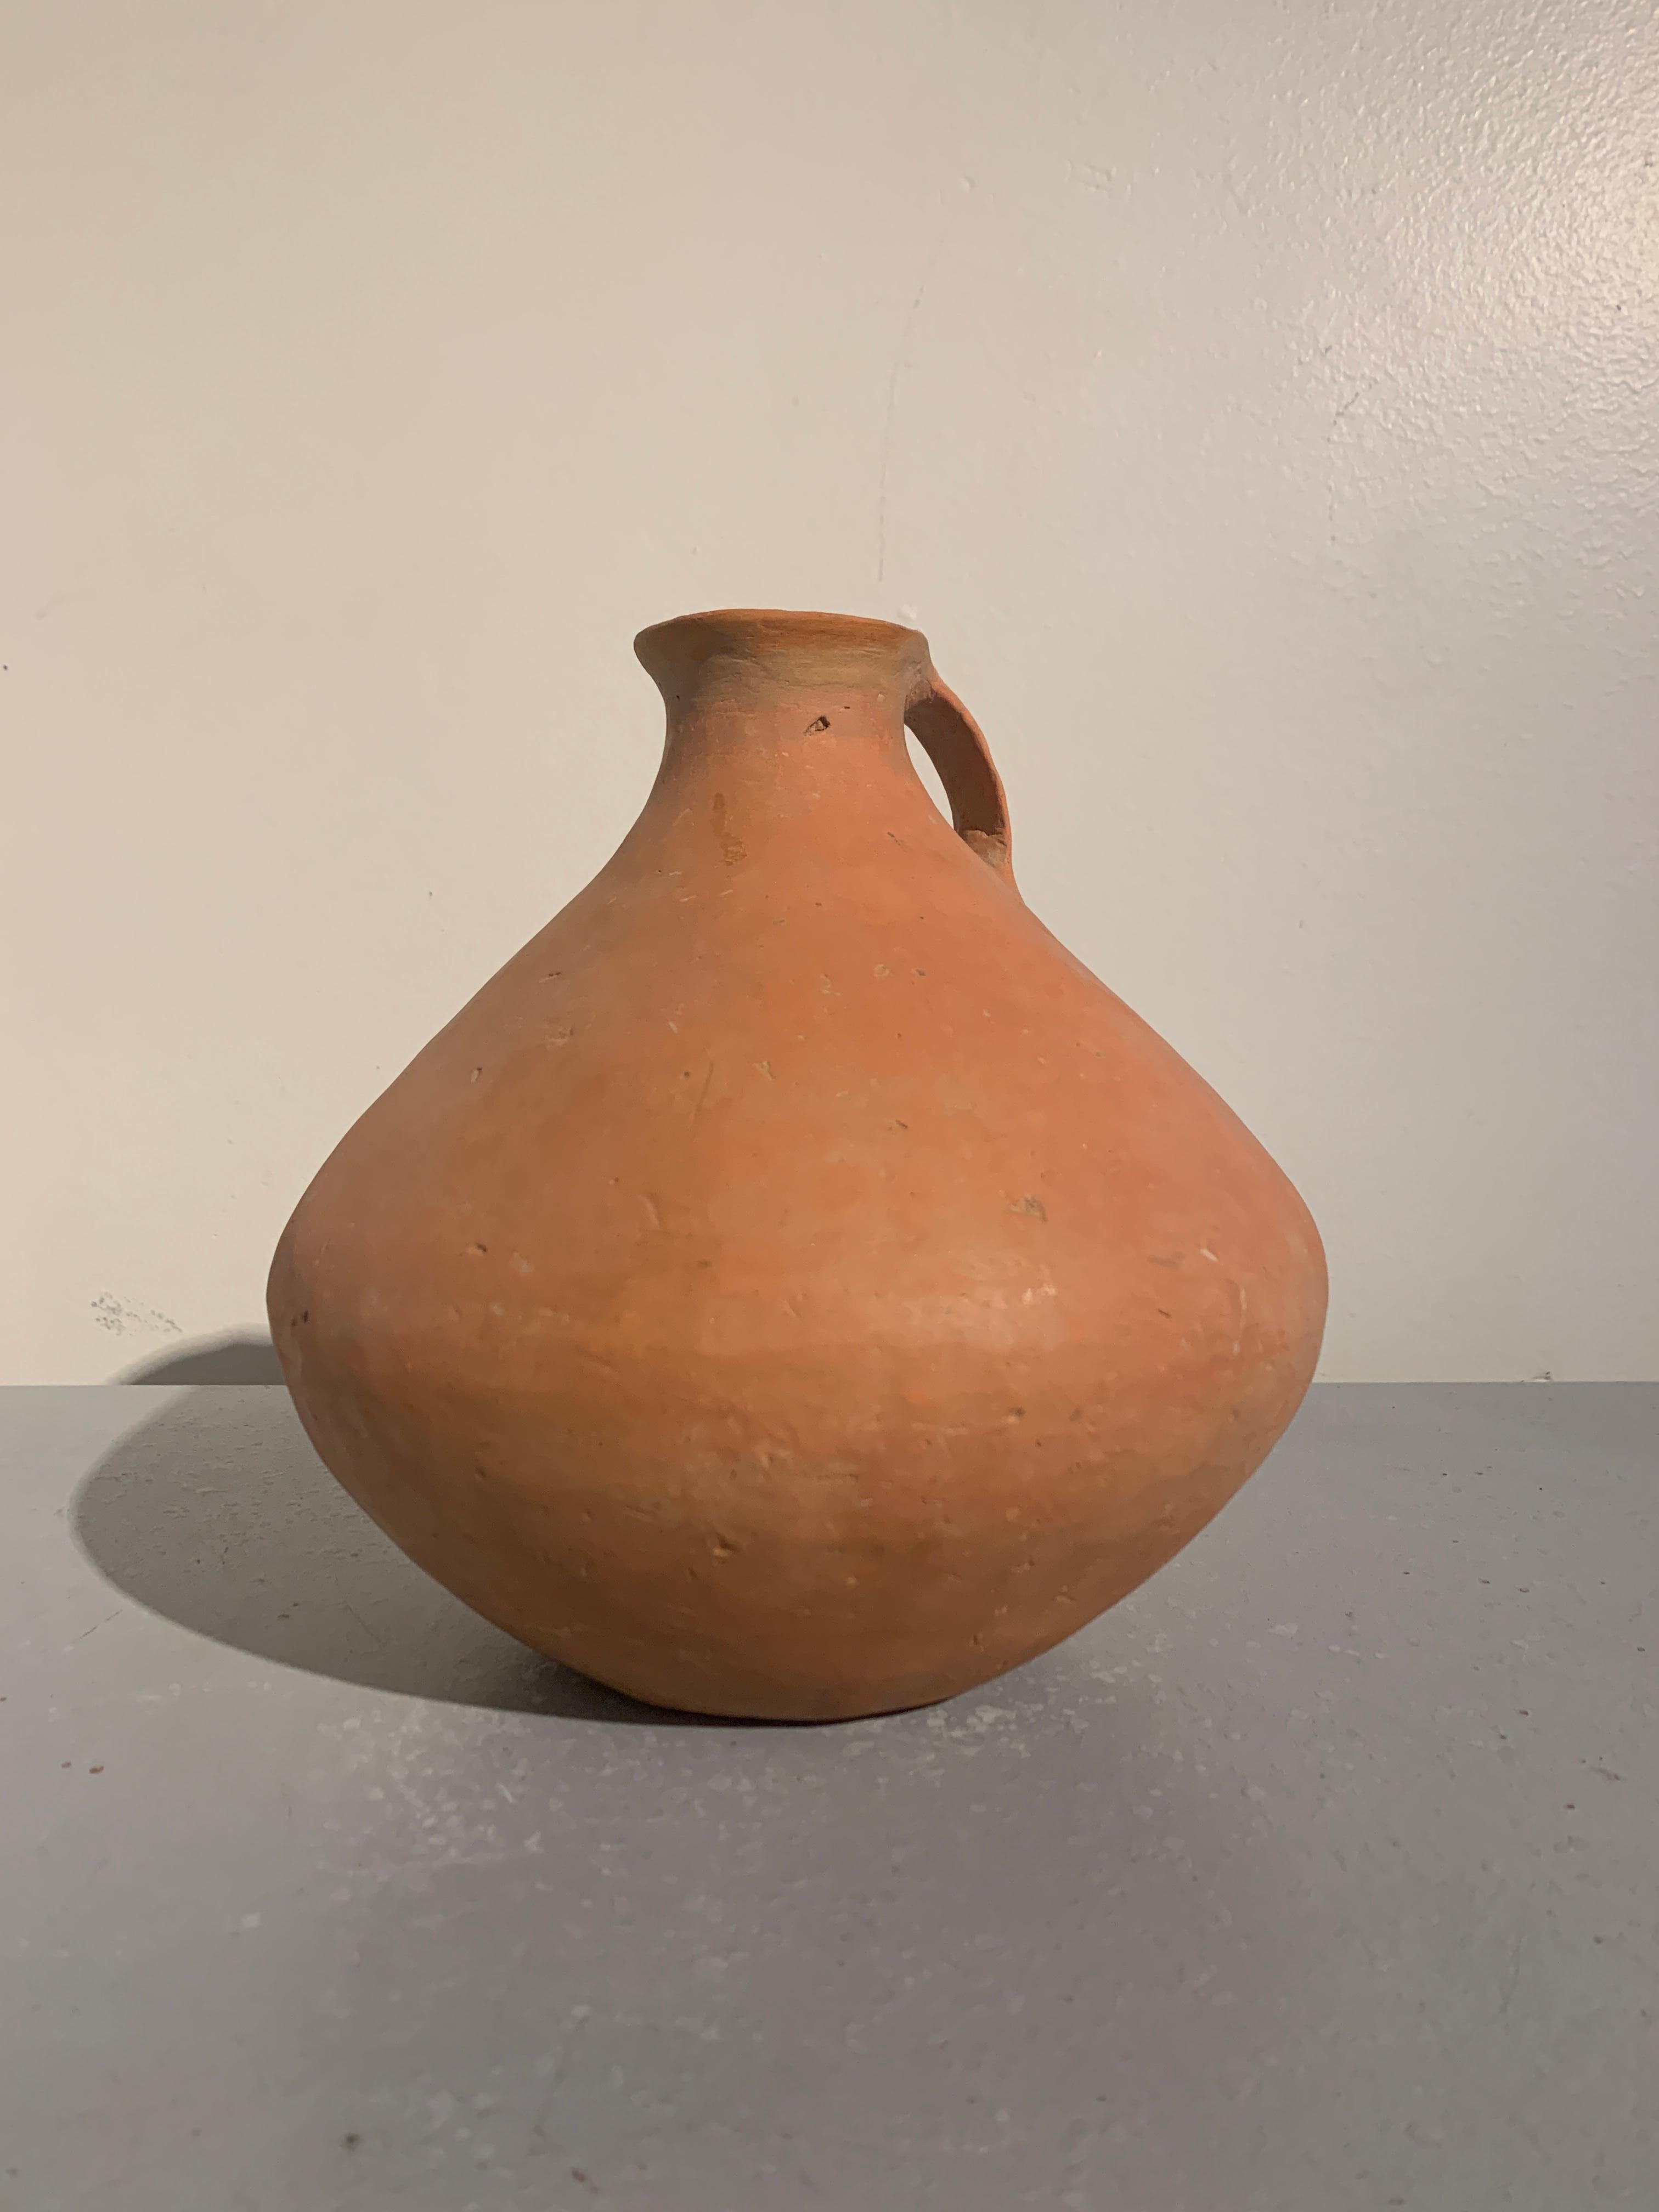 A sublime Chinese neolithic burnished red pottery jug, Qijia Culture (2200 BC - 1600 BC), modern day Gansu Province, China.

The simple jug of alluring form, with a voluptuous body, short, narrow neck with slightly everted mouth, and a single ear